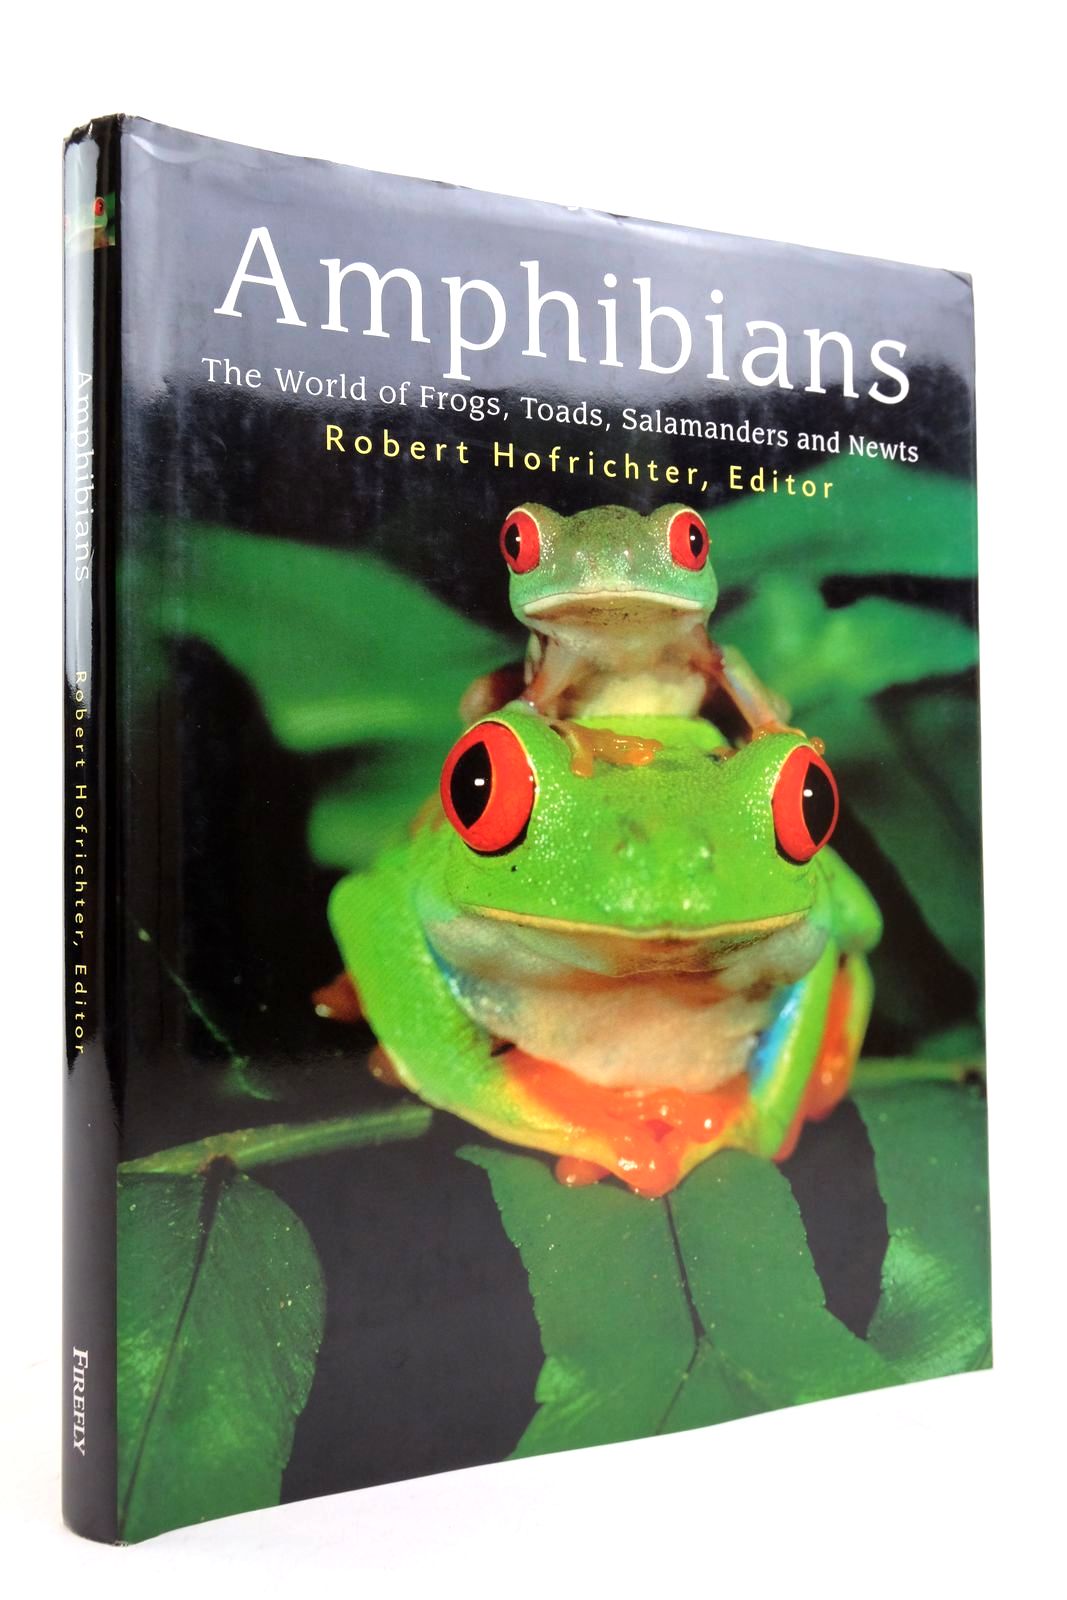 Photo of AMPHIBIANS: THE WORLD OF FROGS, TOADS, SLAMANDERS AND NEWTS written by Hofrichter, Robert published by Firefly Books (u.S.) Inc. (STOCK CODE: 2139443)  for sale by Stella & Rose's Books